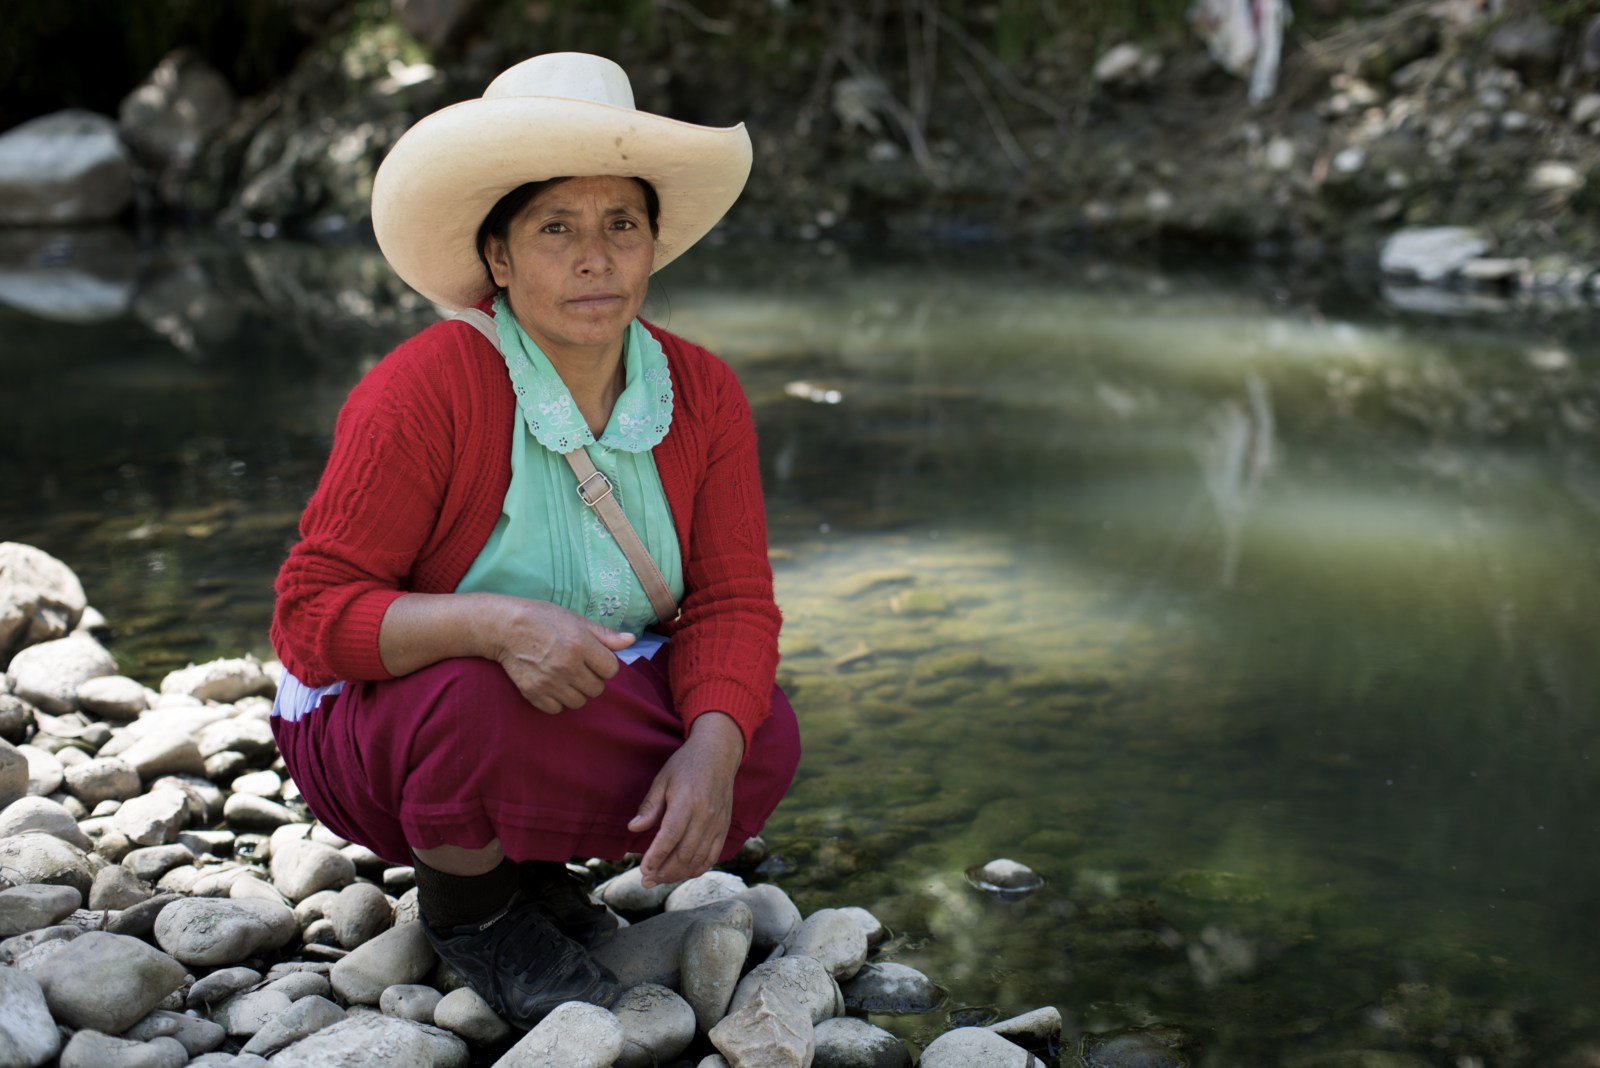 Peru: Human rights defender Máxima Acuña criminalised by unsubstantiated criminal prosecution for land invasion